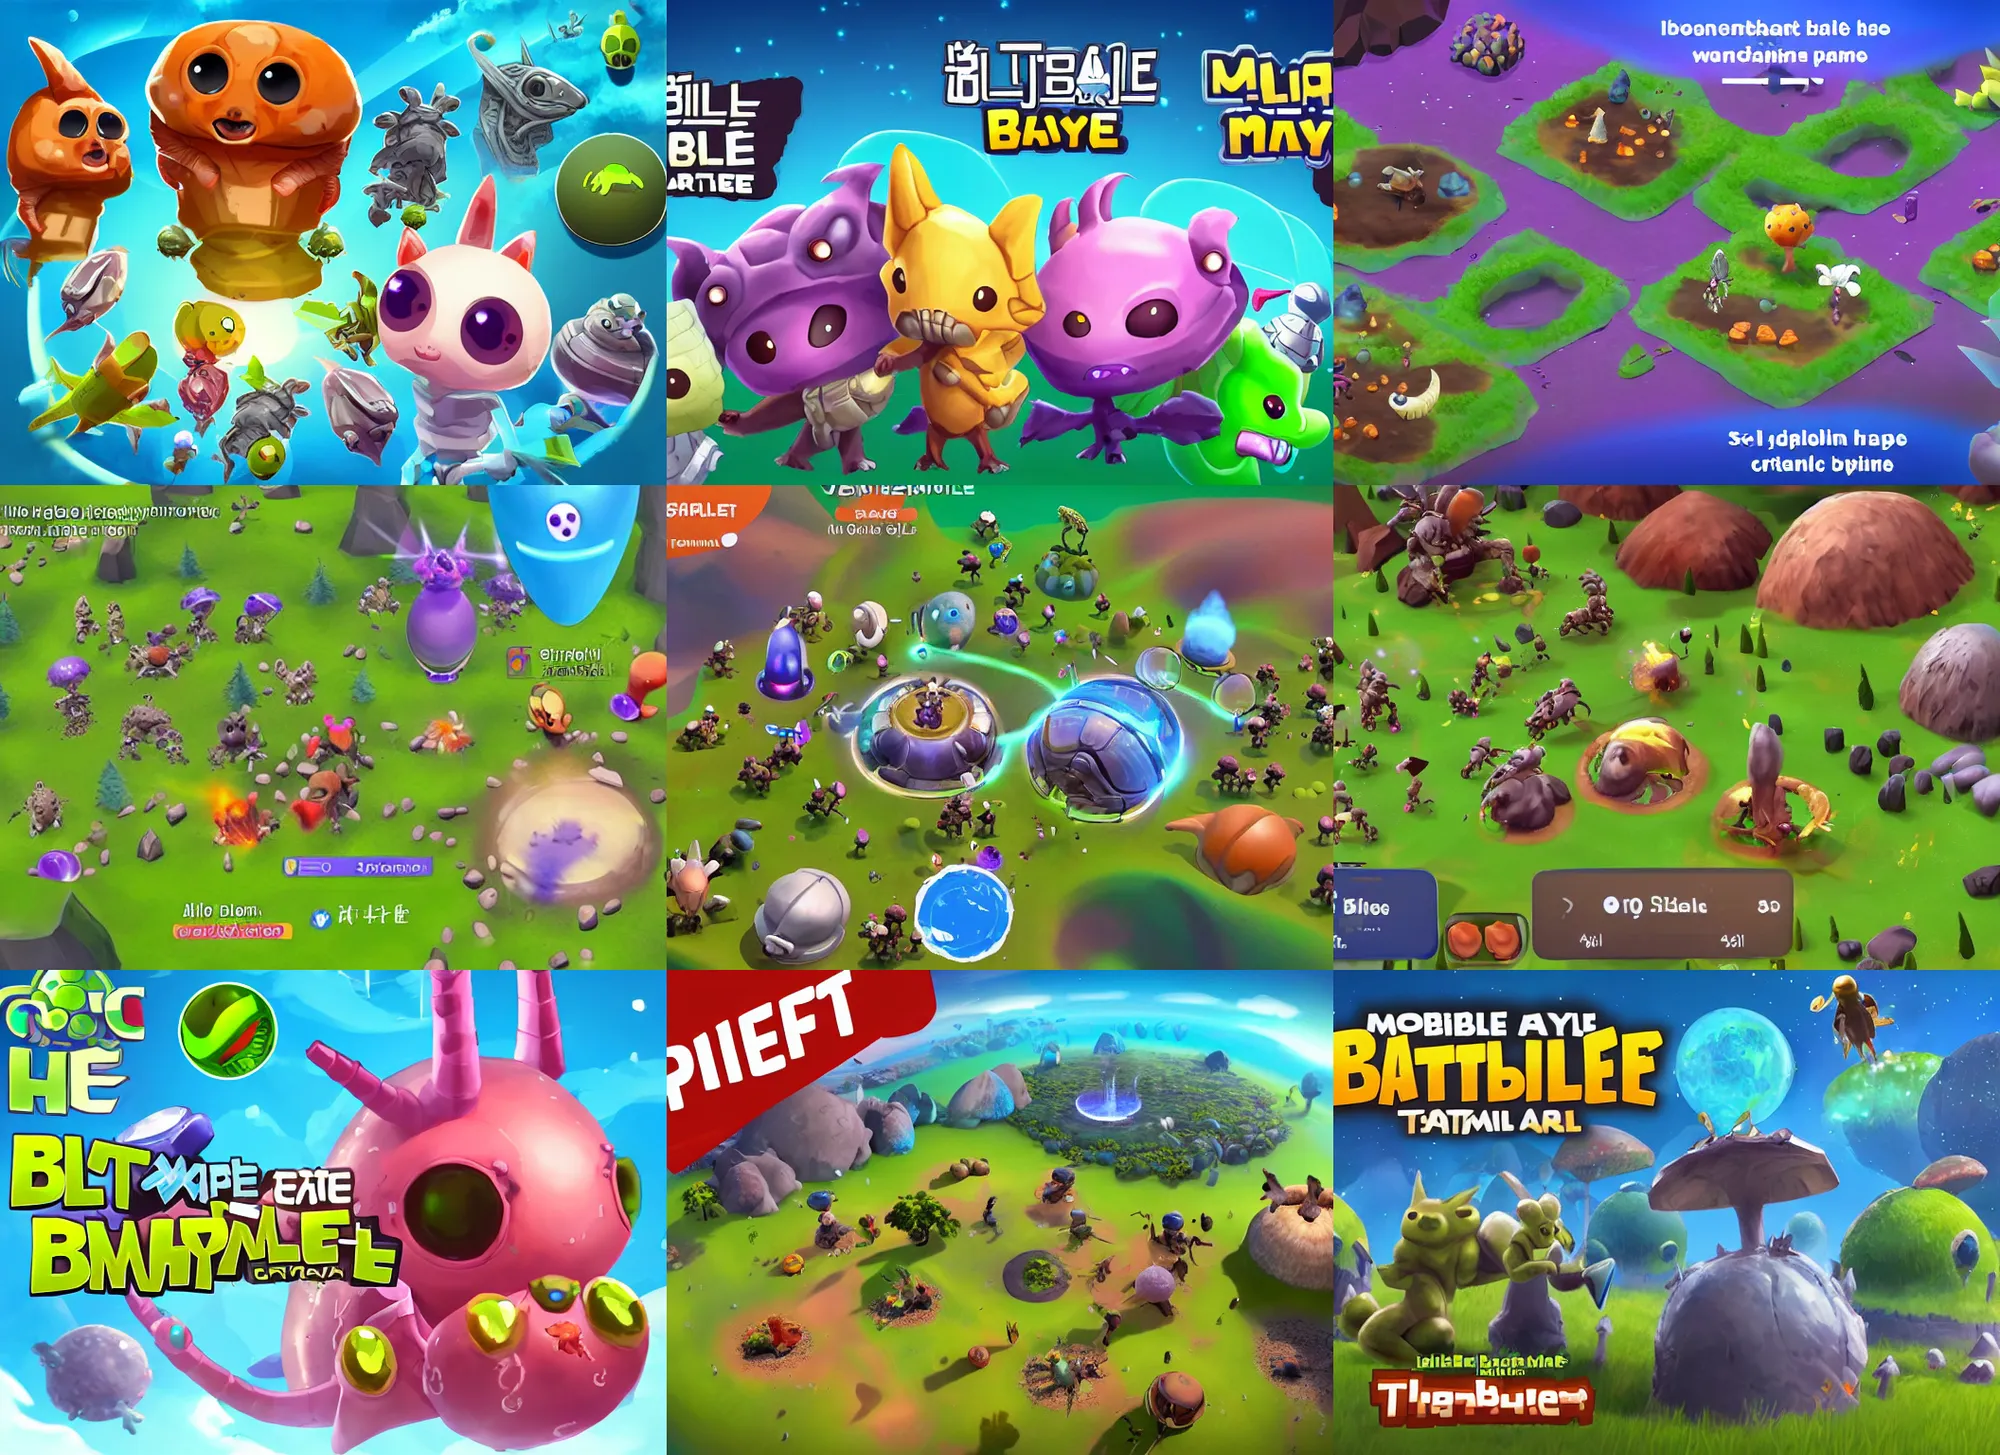 Prompt: mobile battle royale game about alien cute little animals that land on a planet with different biomes, craters, alien capsules, bushes in the visual style of Spore and Eternal Cylinder, world curvature, game overlay, hp mp stamina bars, 3rd person camera